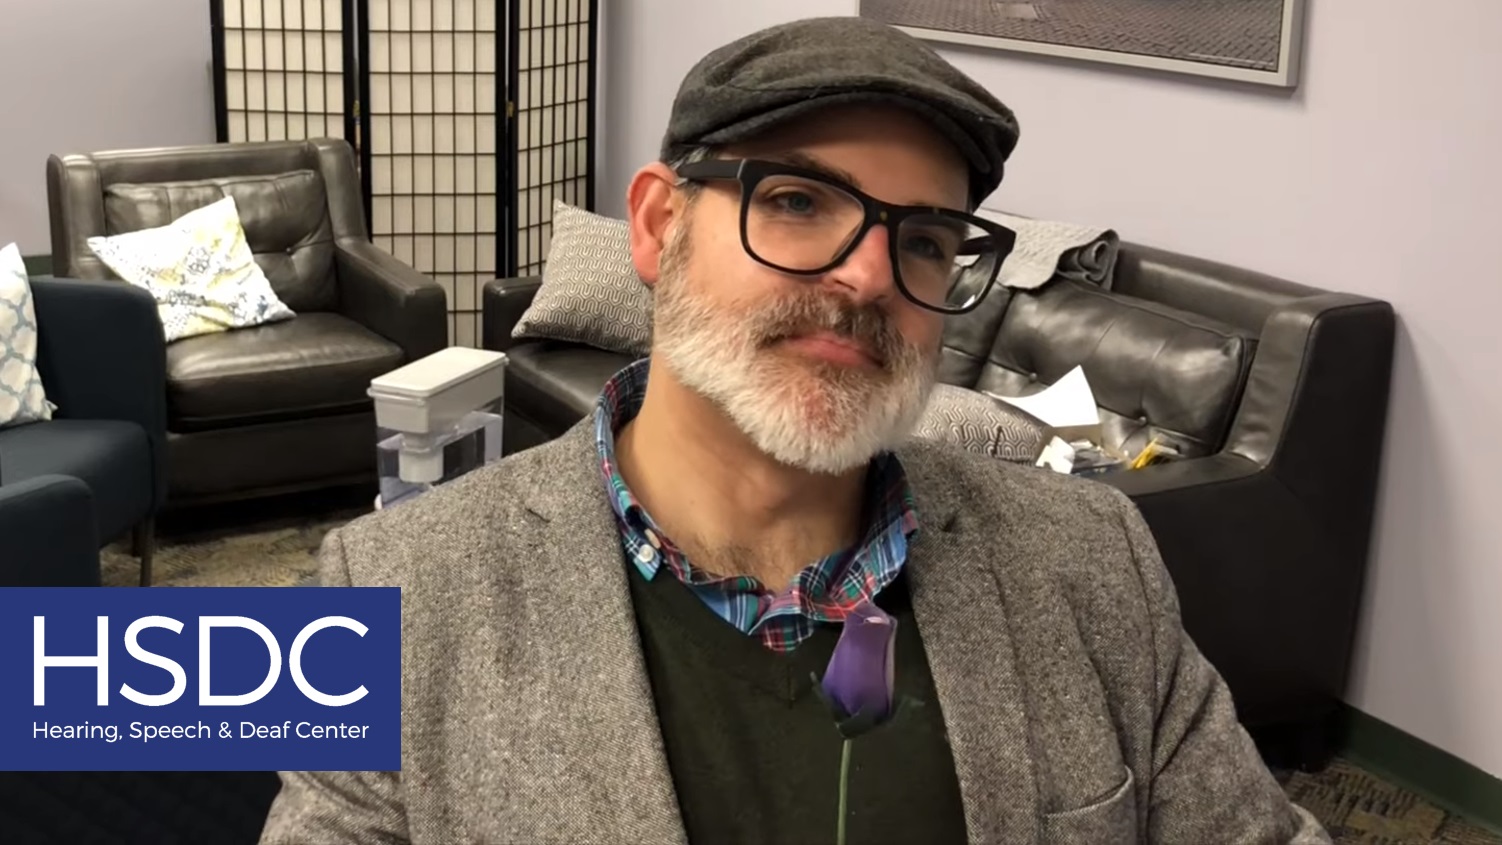 A screenshot of a video. A man with a gray beard, black glasses, grey hat, and grey coat is holding a blue flower and looking offscreen to the right. The HSDC logo is in the bottom left corner.